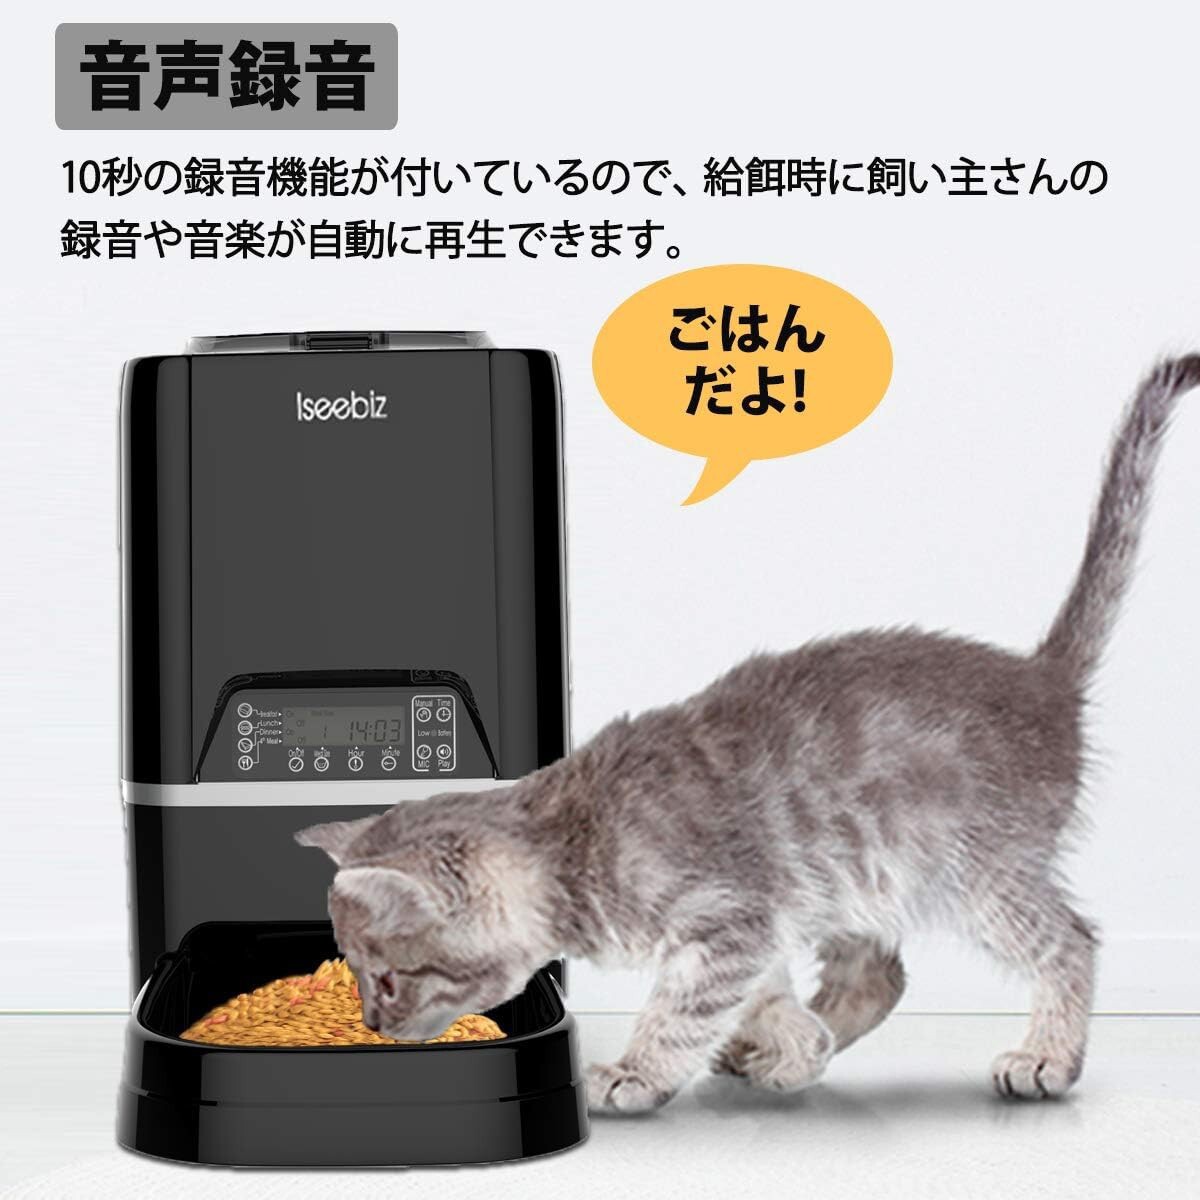  automatic feeder cat dog for pet automatic feeding machine 5L high capacity 1 day 4 meal . maximum 20 day continuation automatic feeding timer type can record washing with water possibility cat / dog 